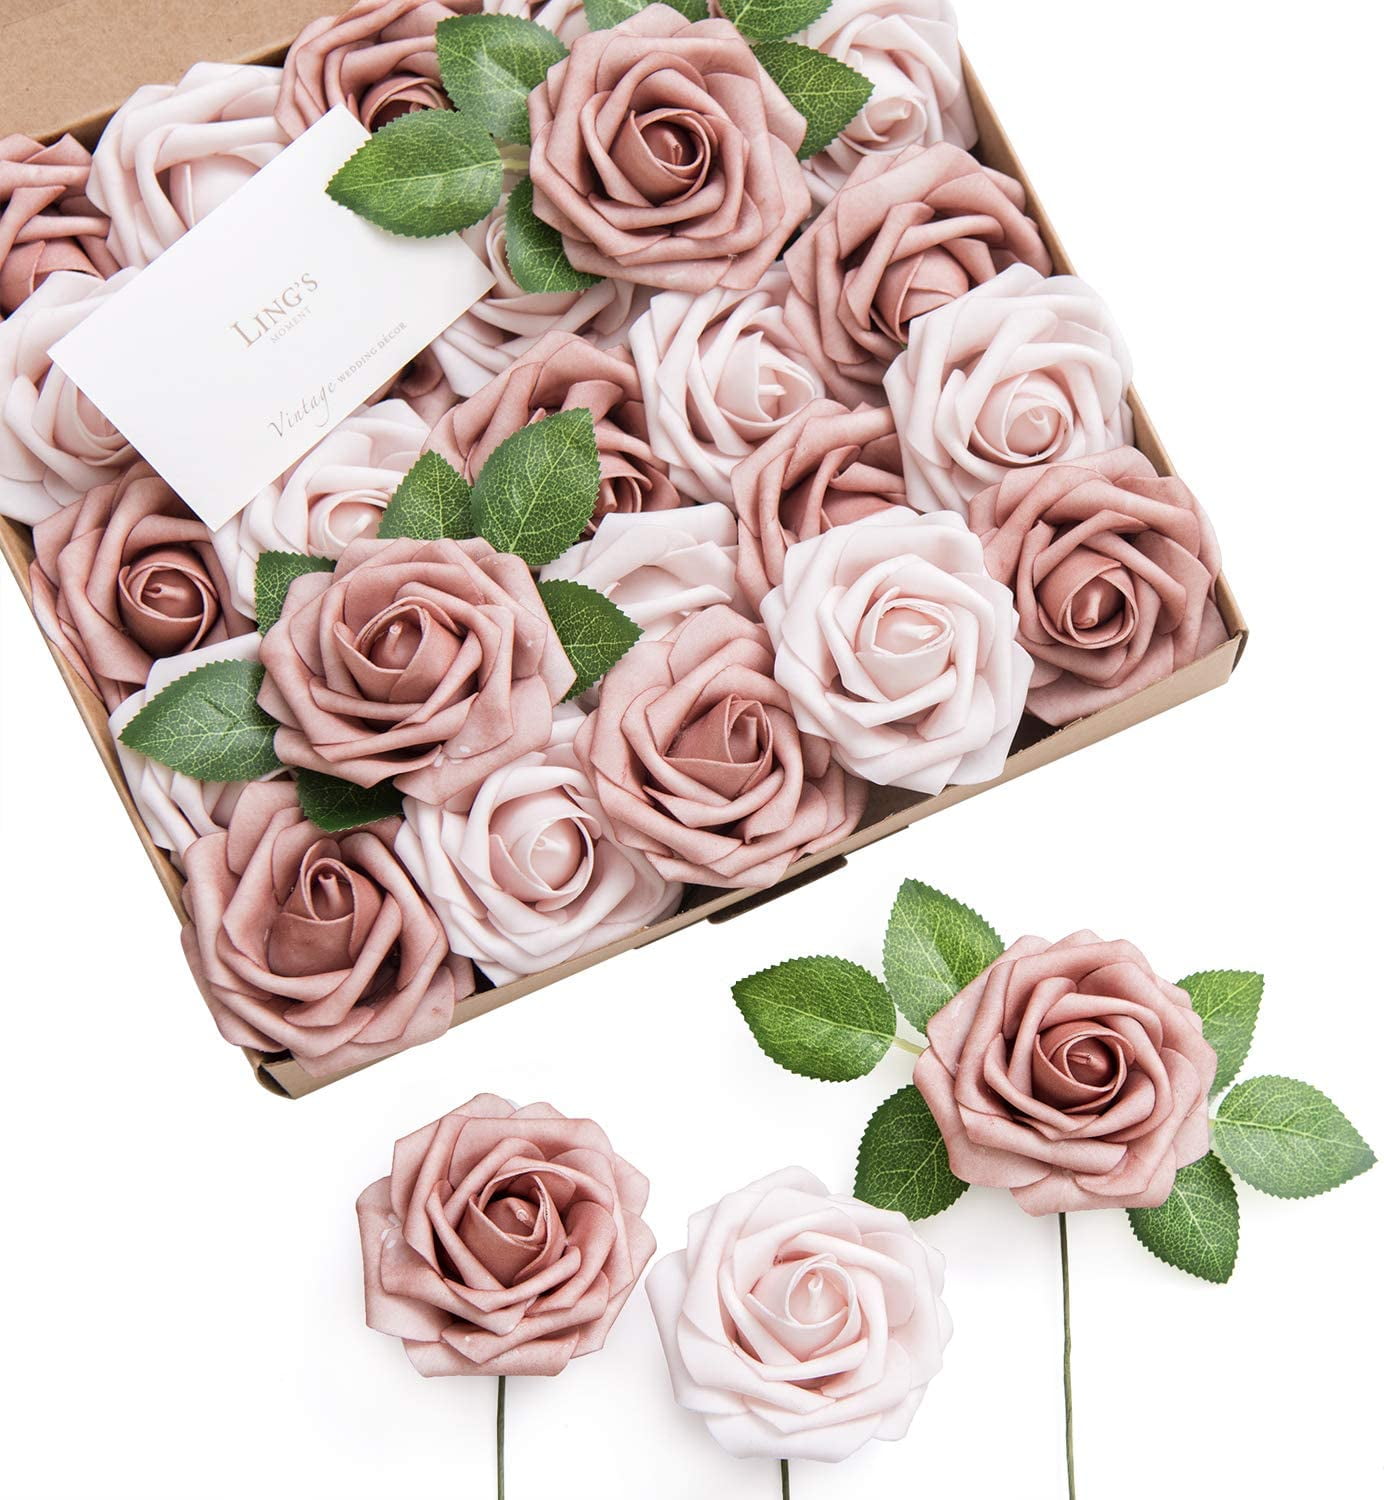 Artificial Flowers Roses 50pcs Real Looking for DIY Wedding Bouquets Pink 